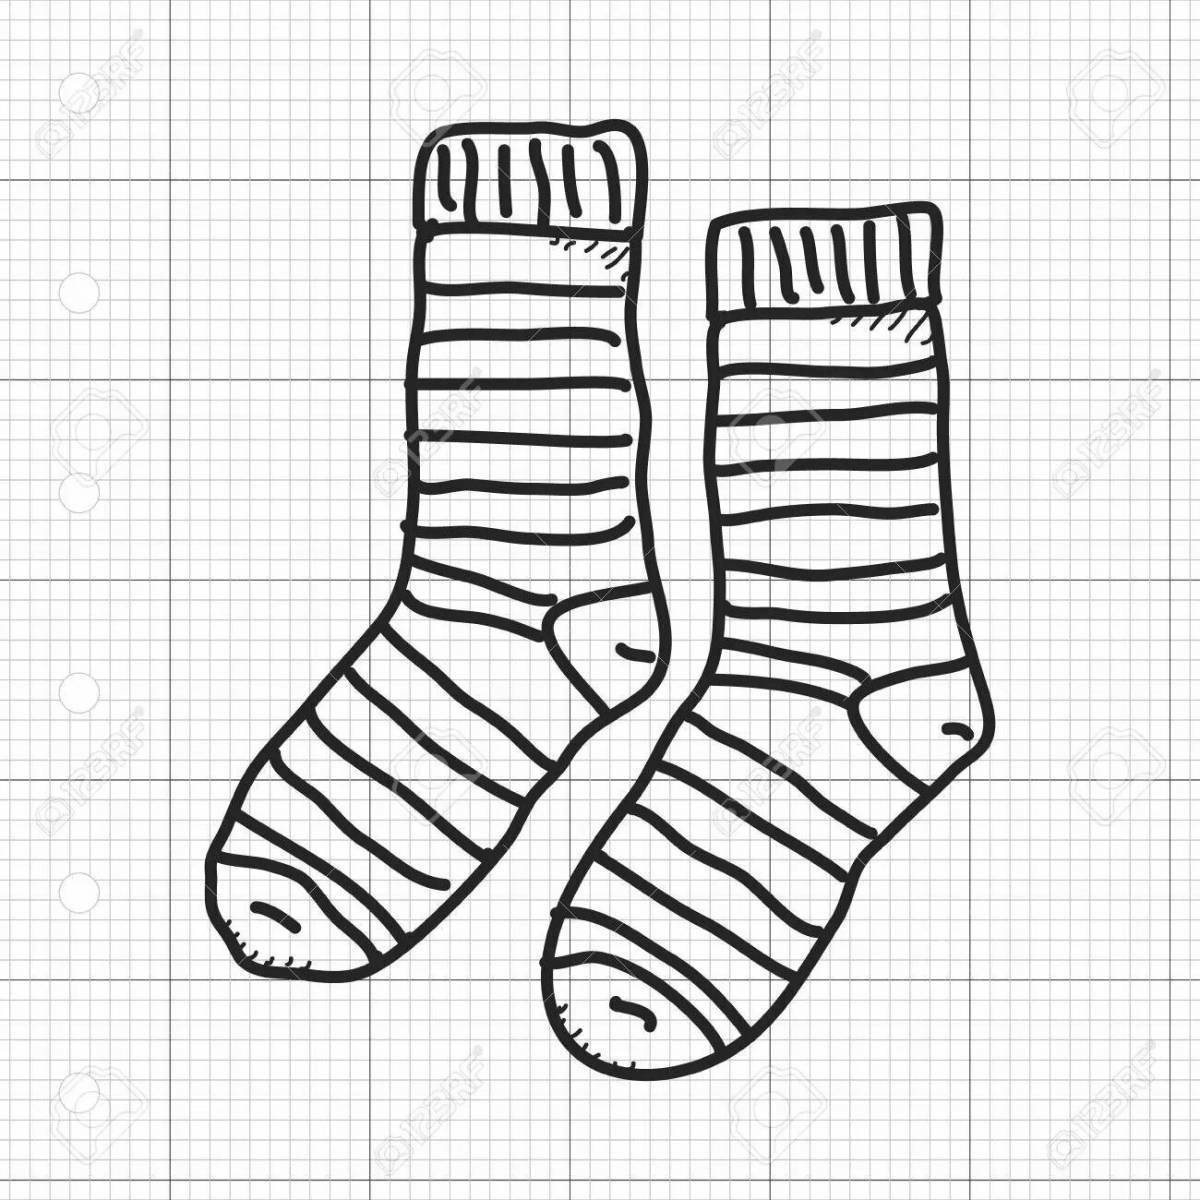 Colored socks coloring book for kids